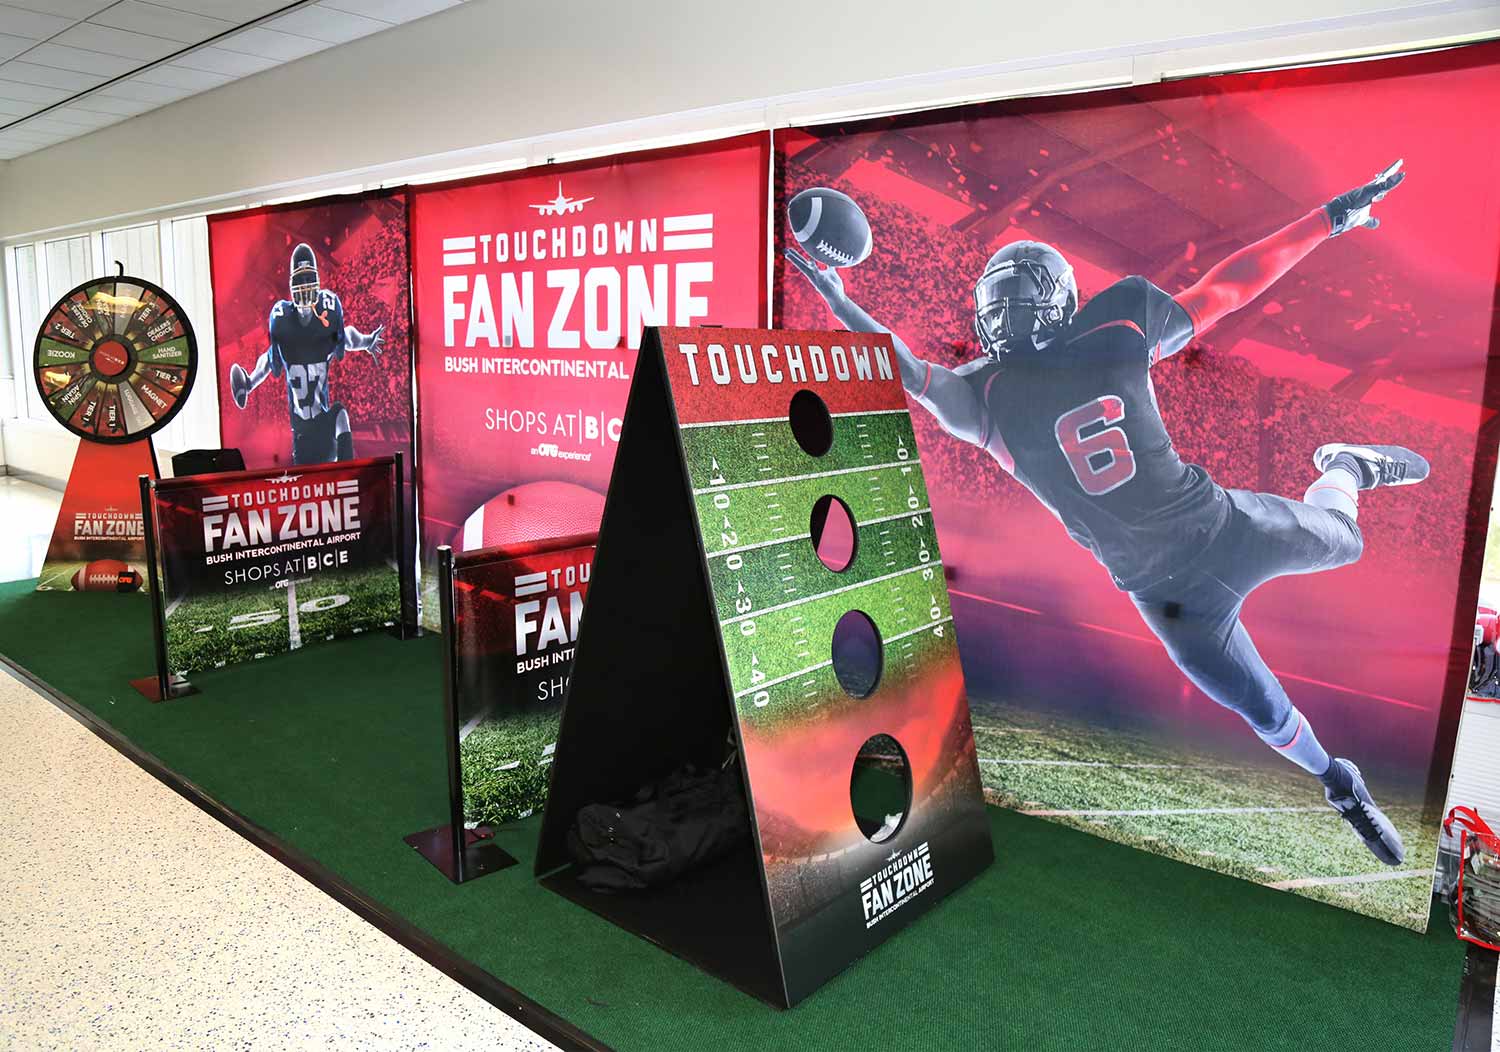 Design of booth and games for Super Bowl event in United Airlines terminals at IAH Houston, TX.